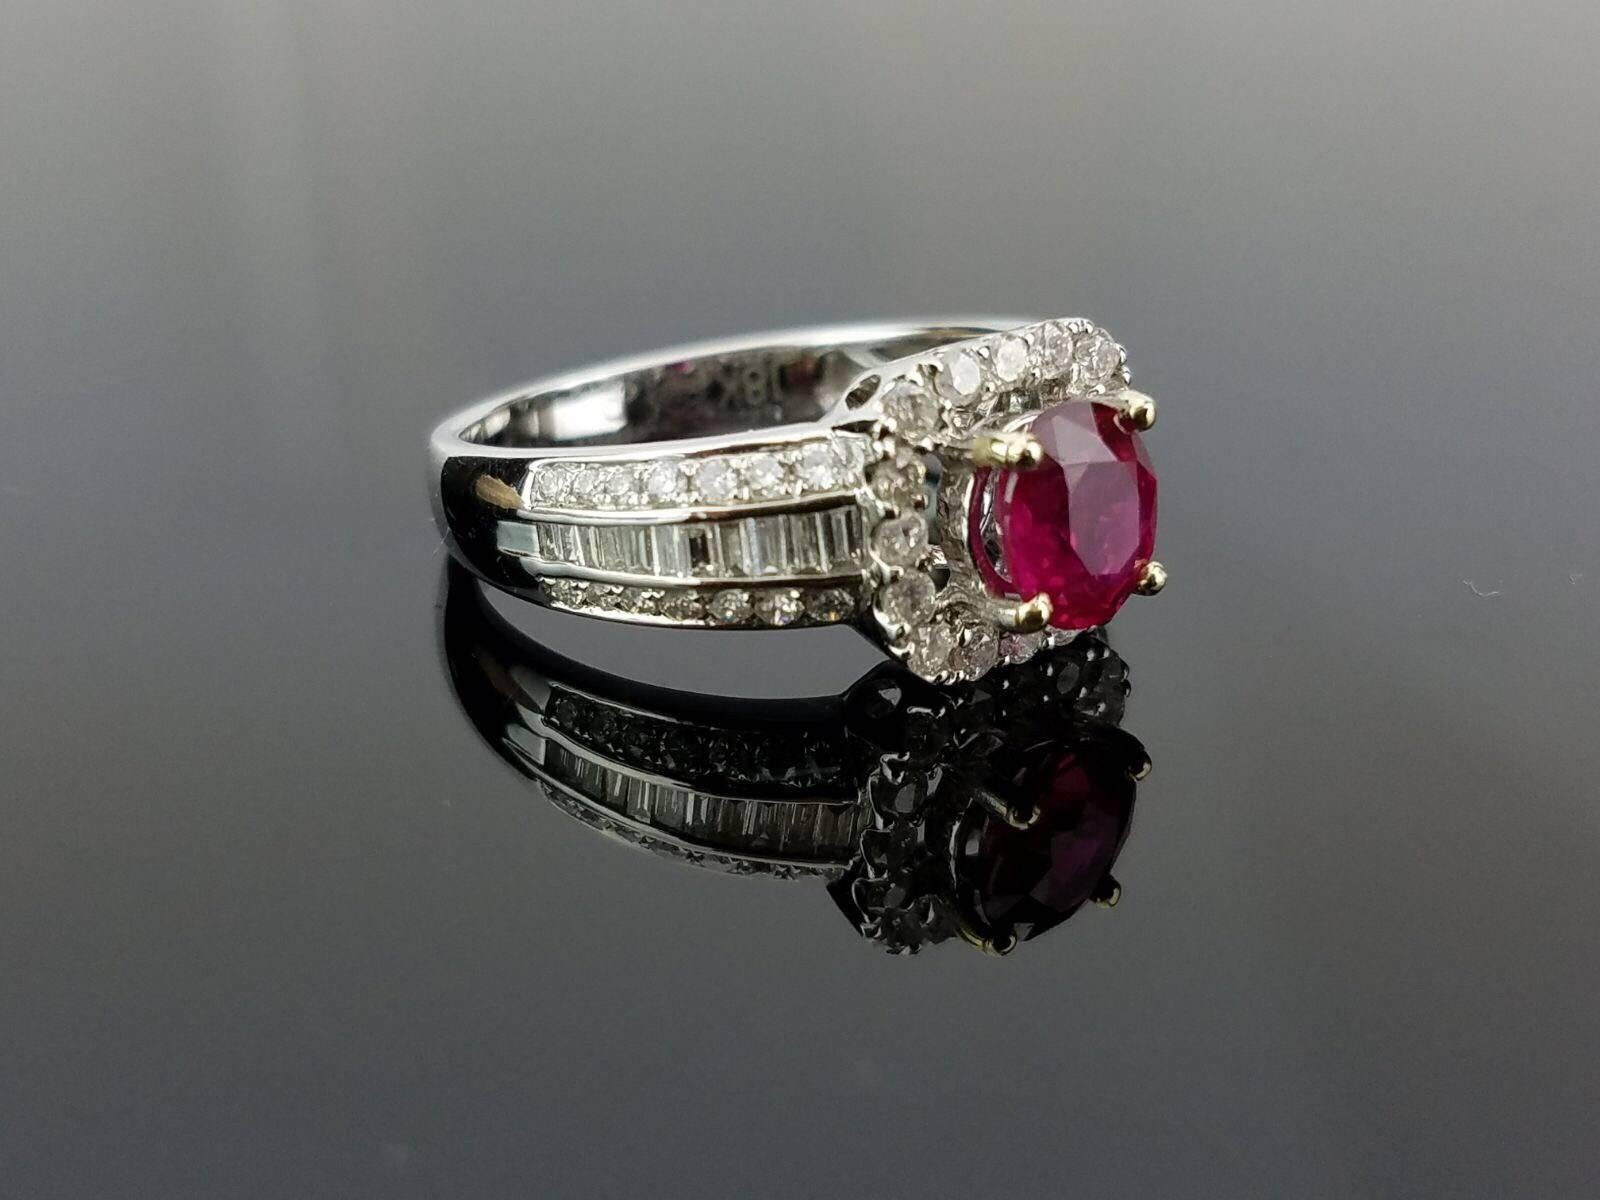 Beautiful and elegant, African Ruby and white Diamond ring all set in 18K white Gold.

Stone Details:  
Stone: African Ruby
Cut: Oval
Carat weight:  1.04 carat

Diamond Details:
Cut: Brilliant (round) / Baguettes 
Total Carat Weight:  0.72